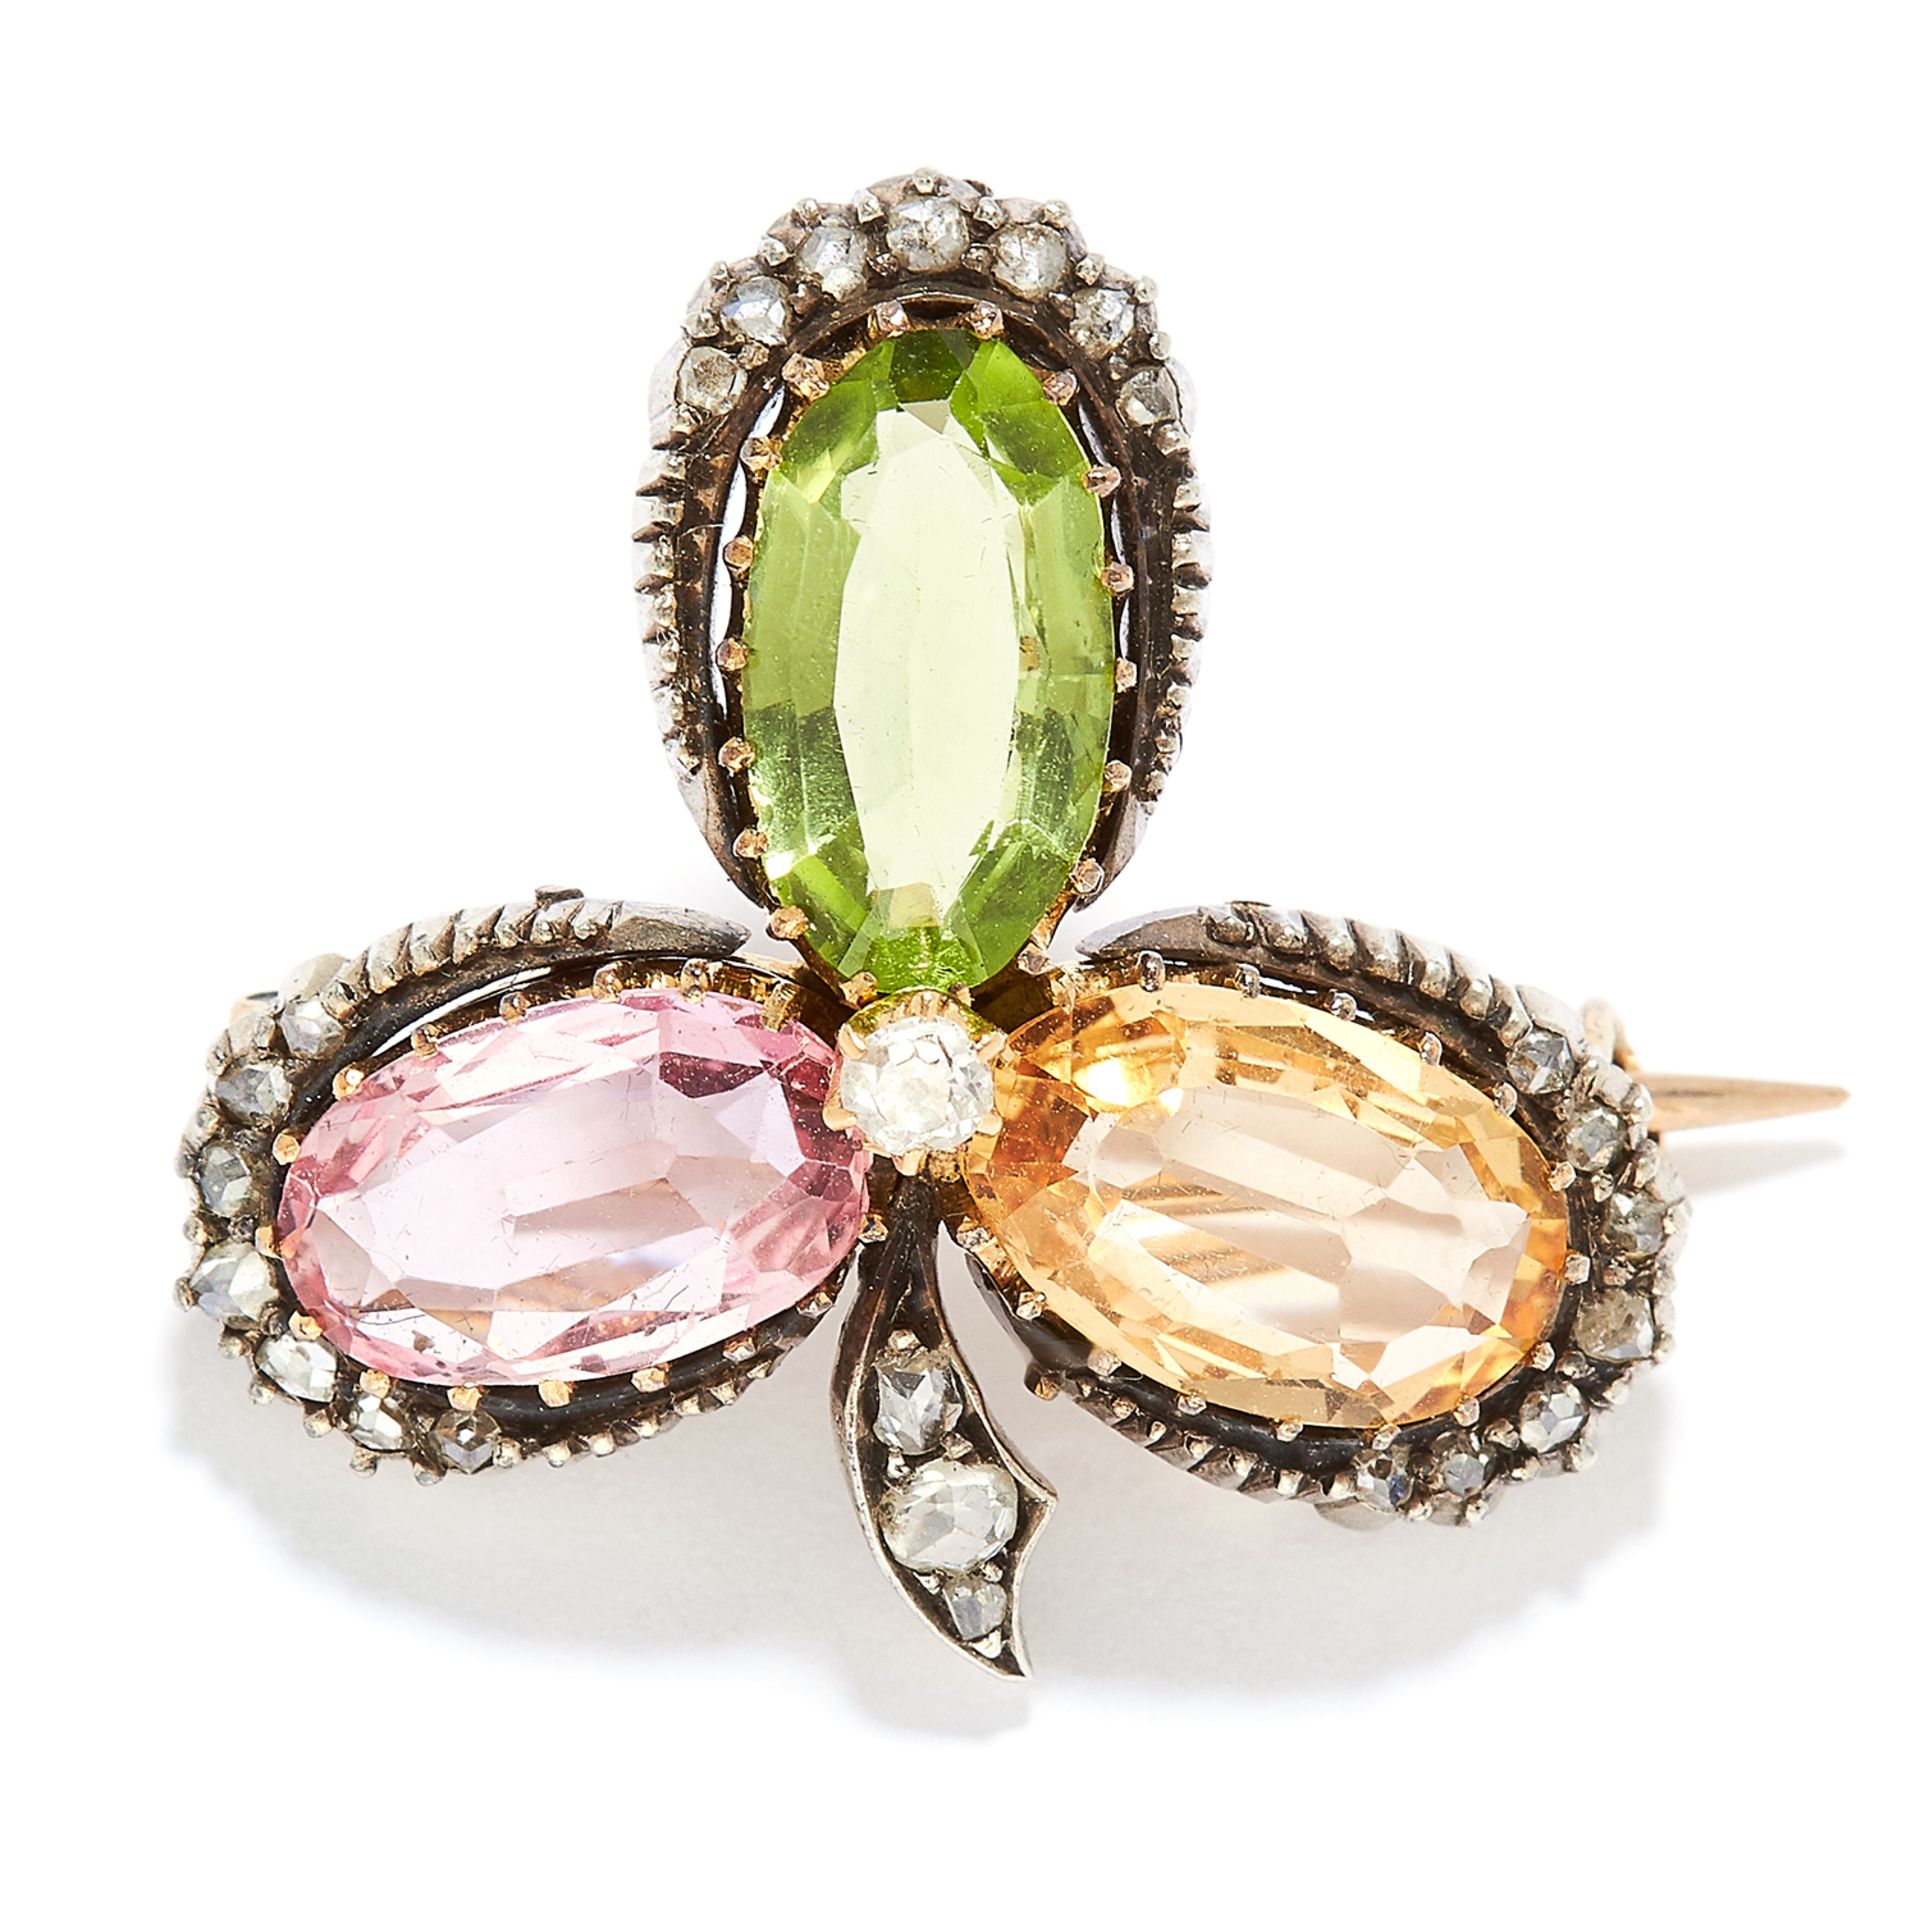 ANTIQUE PERIDOT, TOPAZ AND DIAMOND CLOVER BROOCH in yellow gold, set with an oval cut peridot,